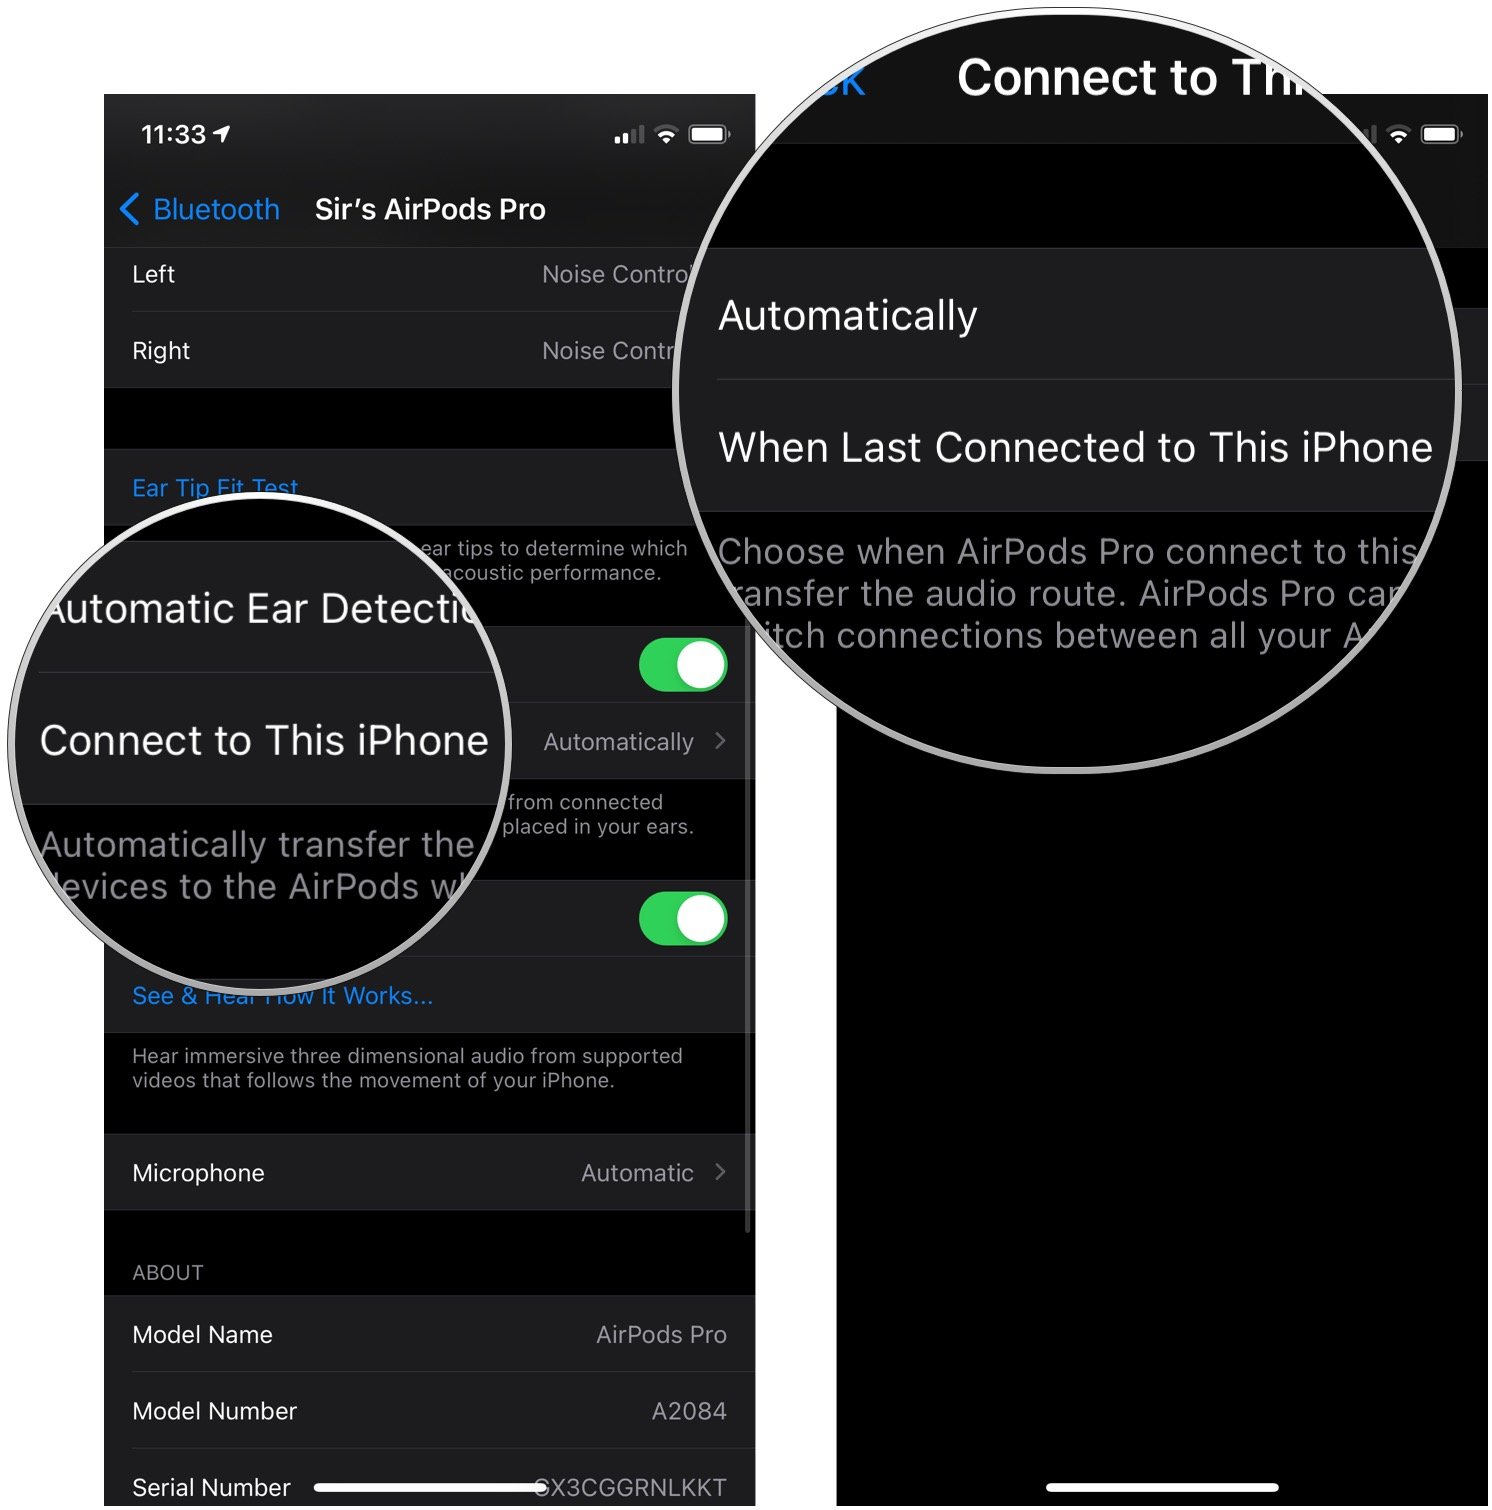 How to turn off automatic switching, showing how to tap Connect to This iPhone, then tap When Last Connected to This iPhone